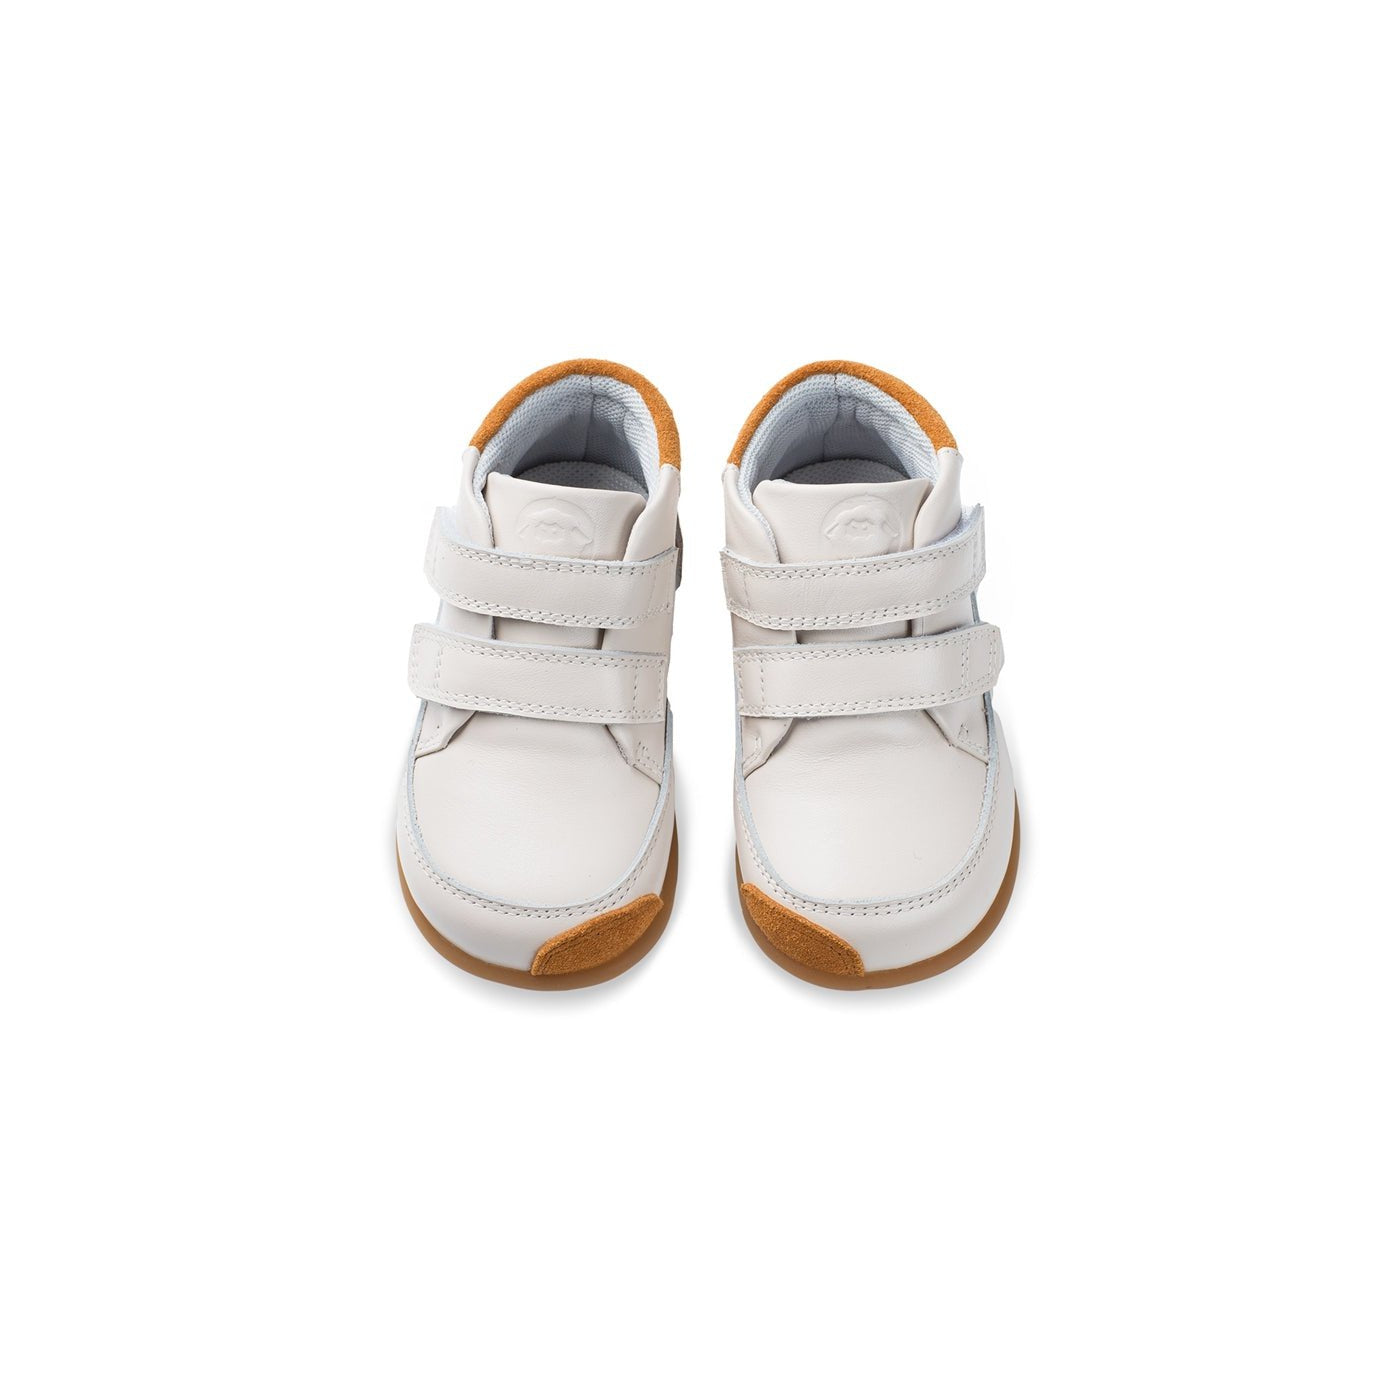 Patch Mark Soft Sole Pre-walker Cream Baby Mid-top Sneakers - 0cm